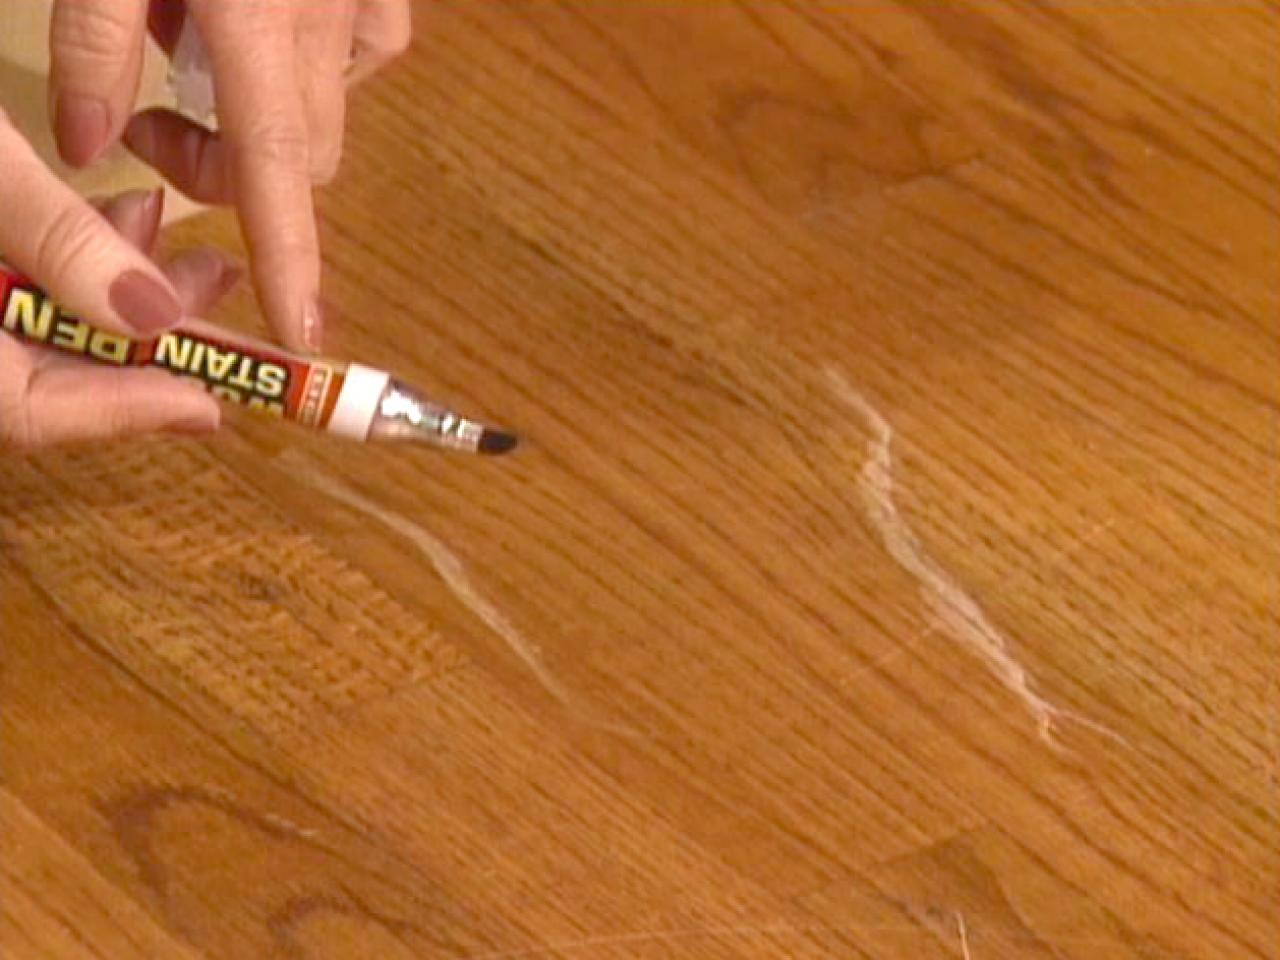 How To Touch Up Wood Floors Tos Diy, How To Remove Scuff Marks Off Vinyl Flooring